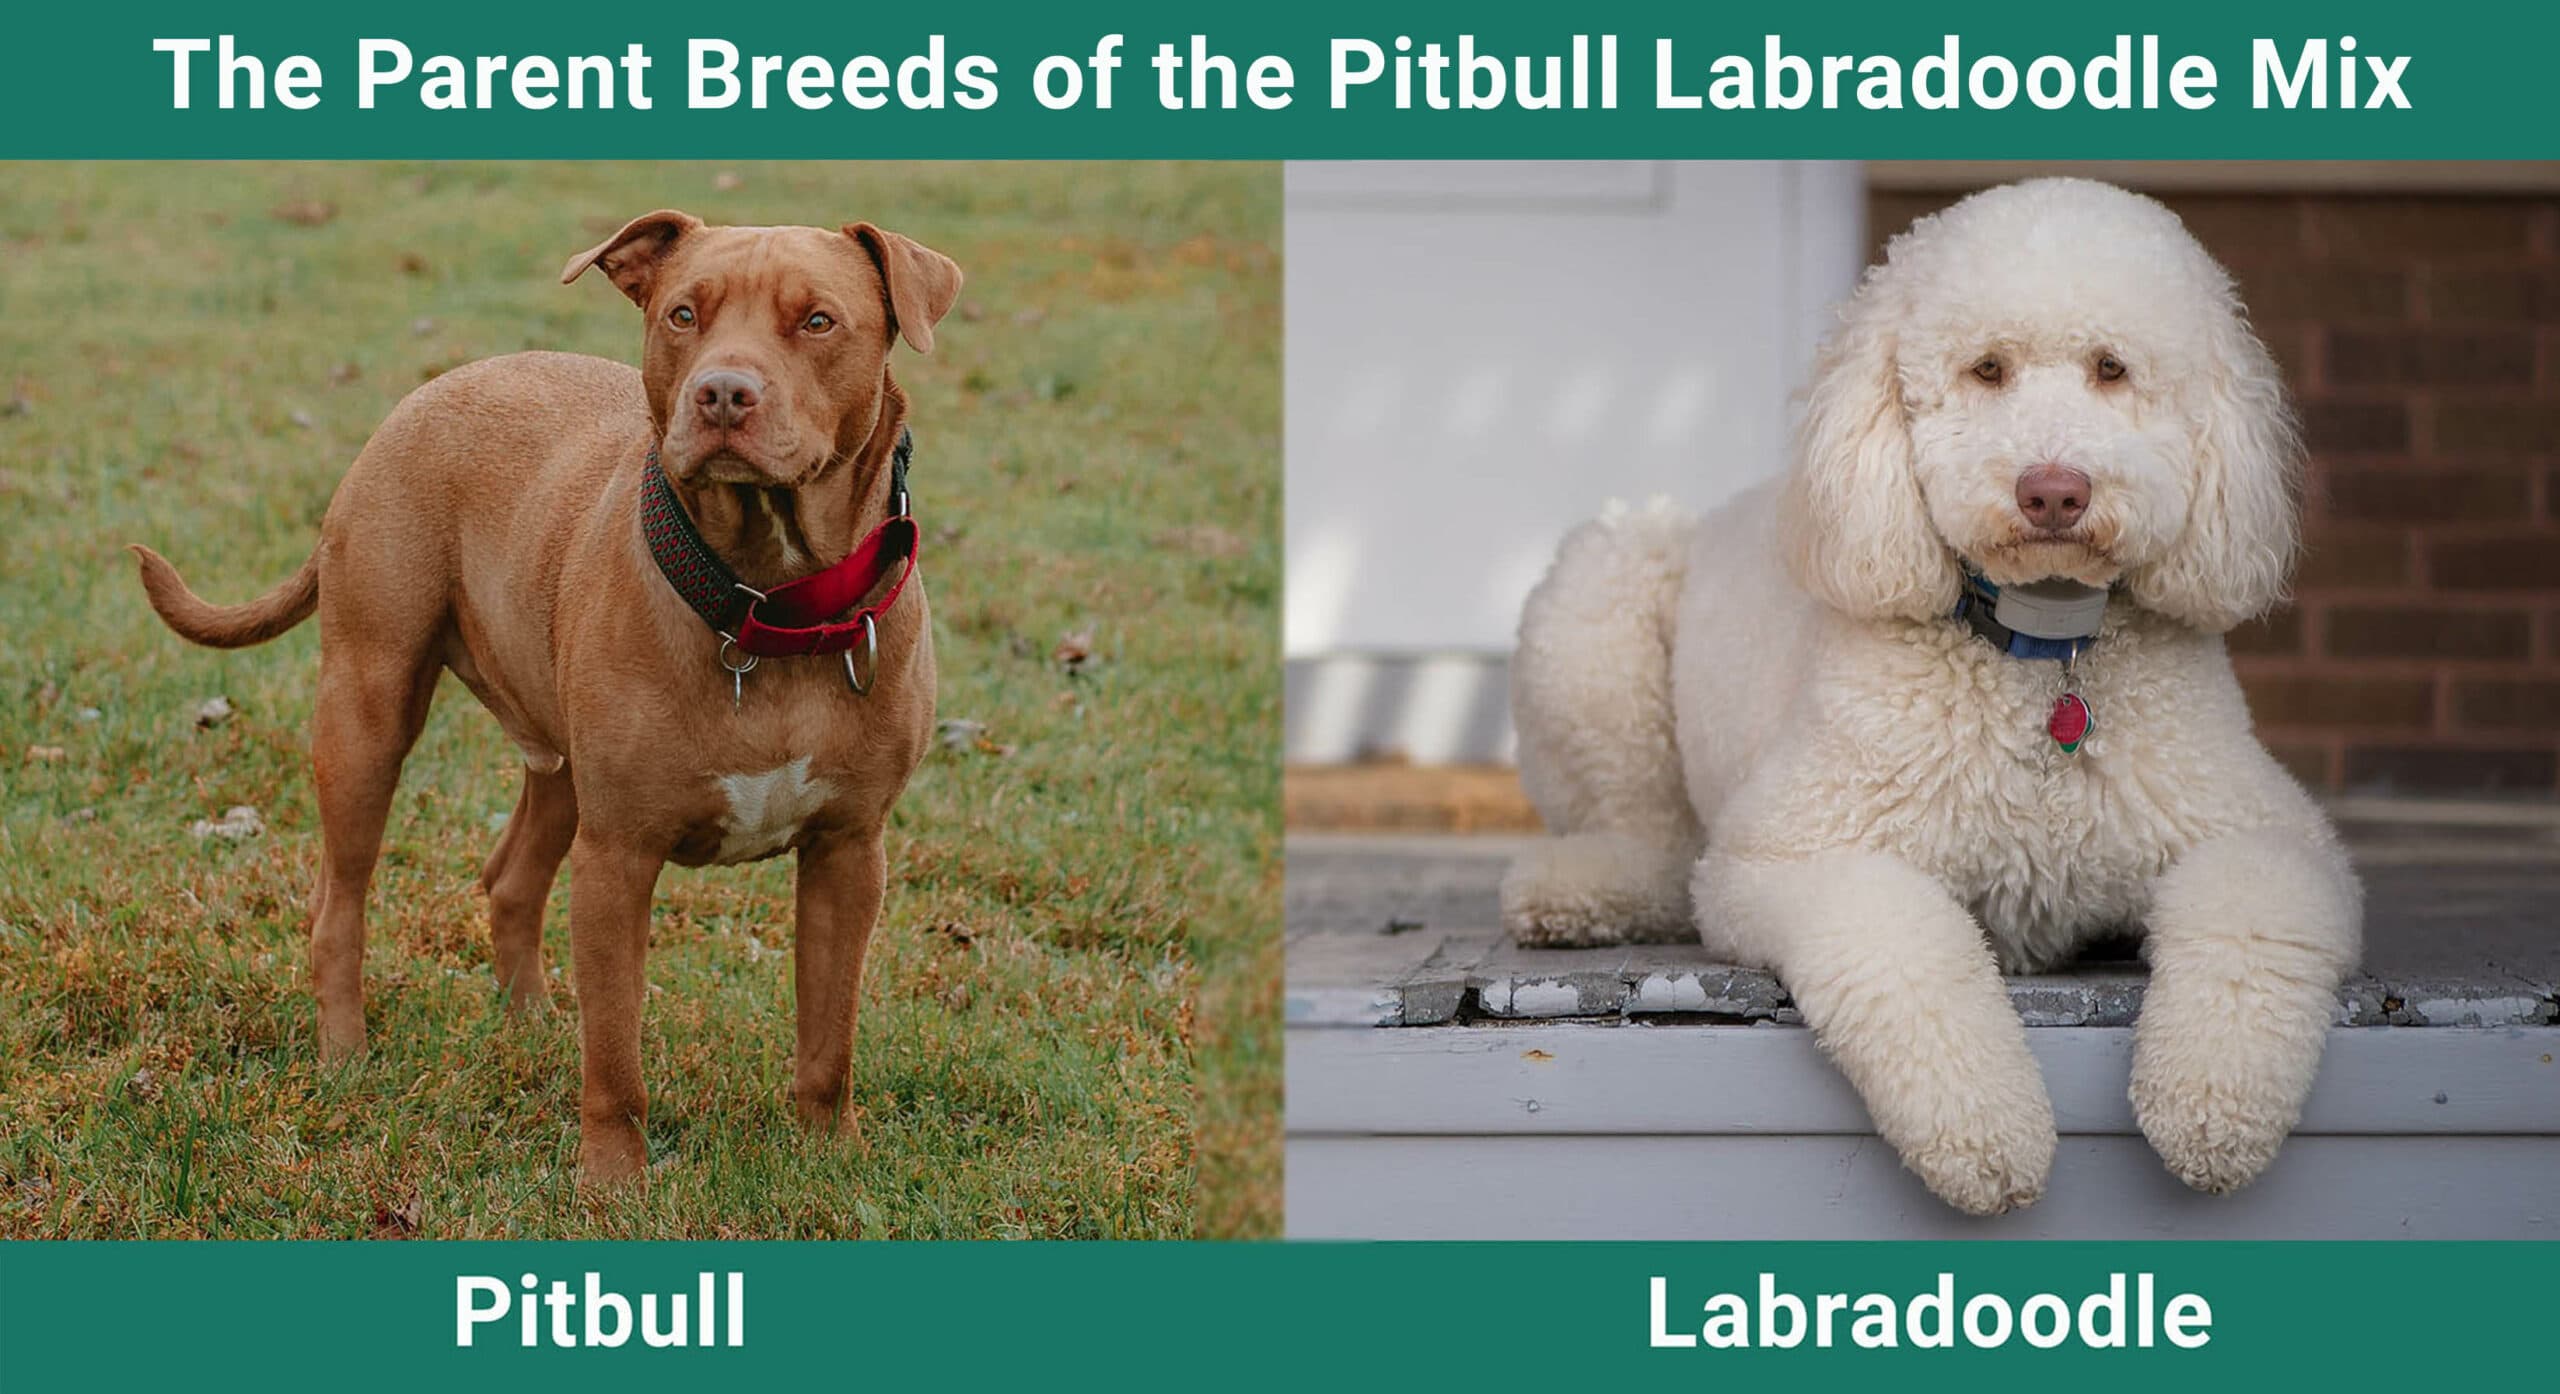 The Parent Breeds of the Pitbull Labradoodle Mix